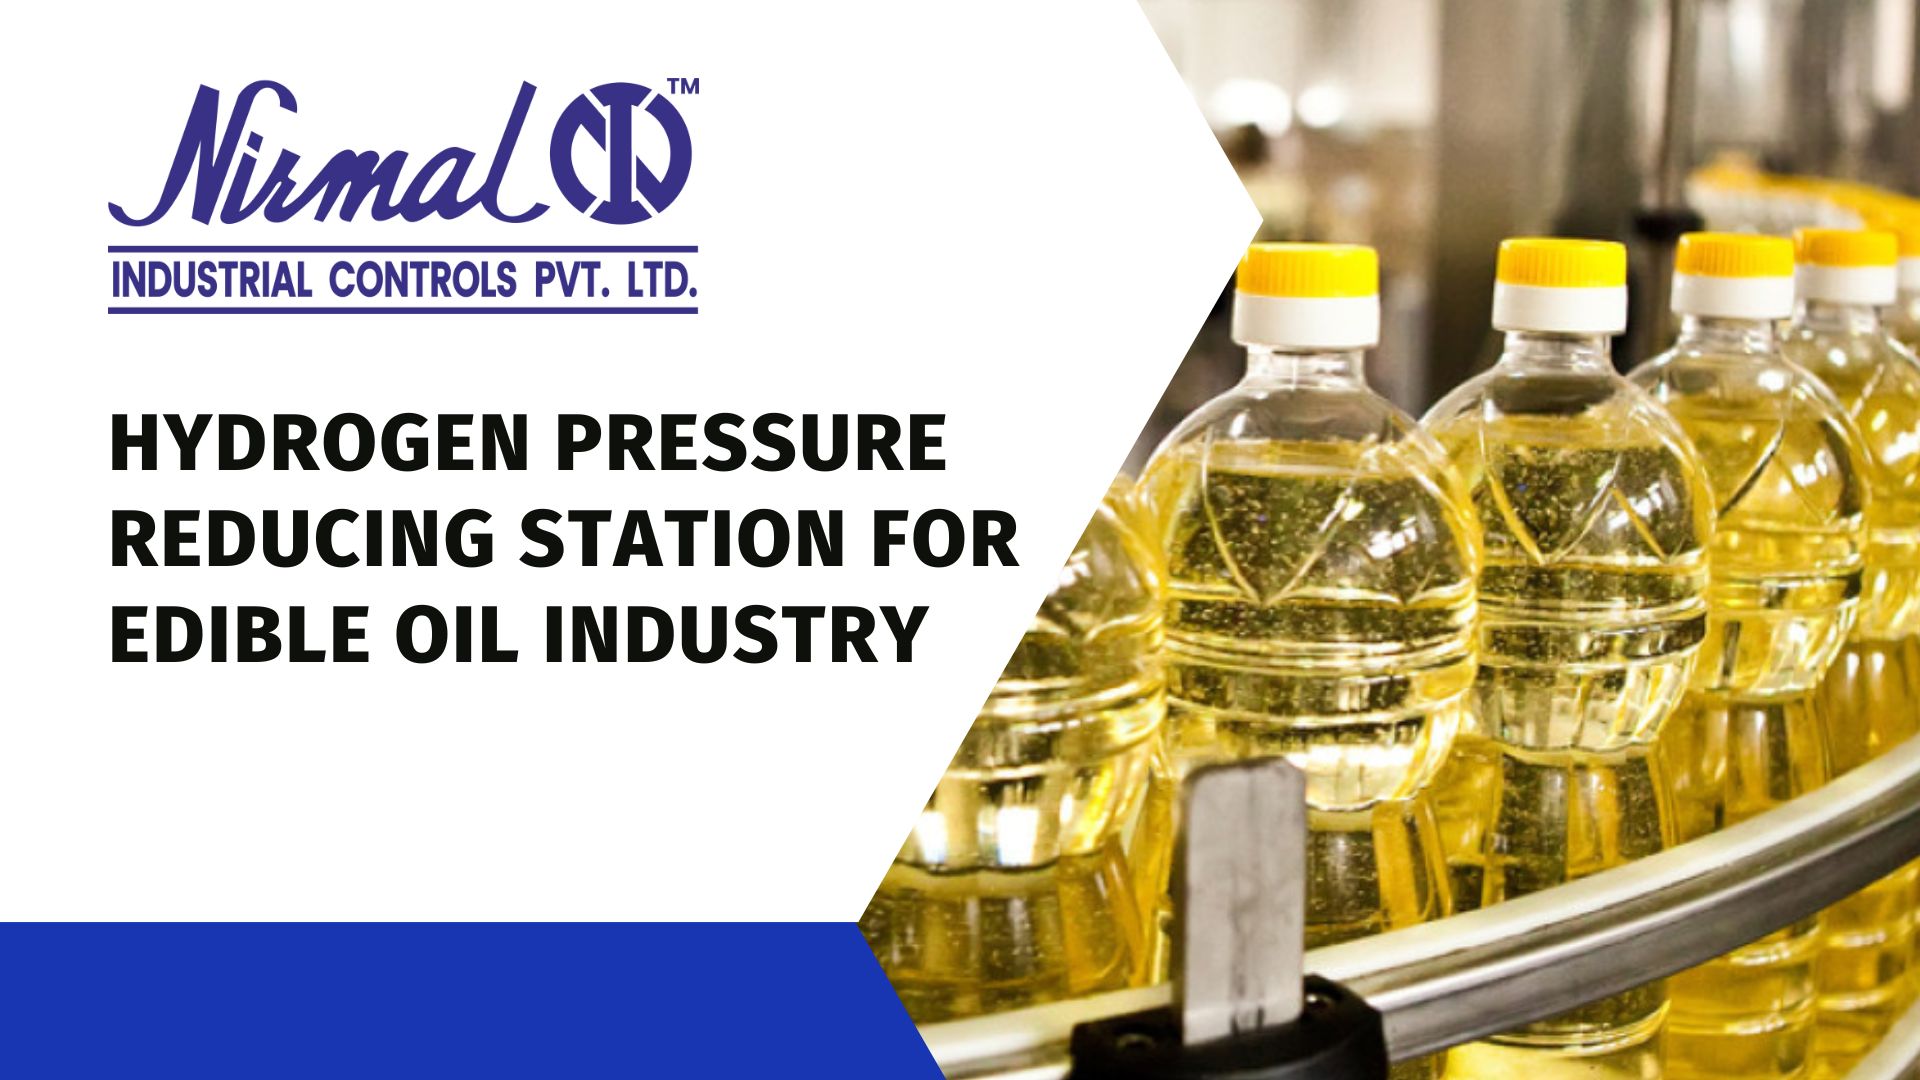 Hydrogen Pressure Reducing Station for Edible Oil Industry